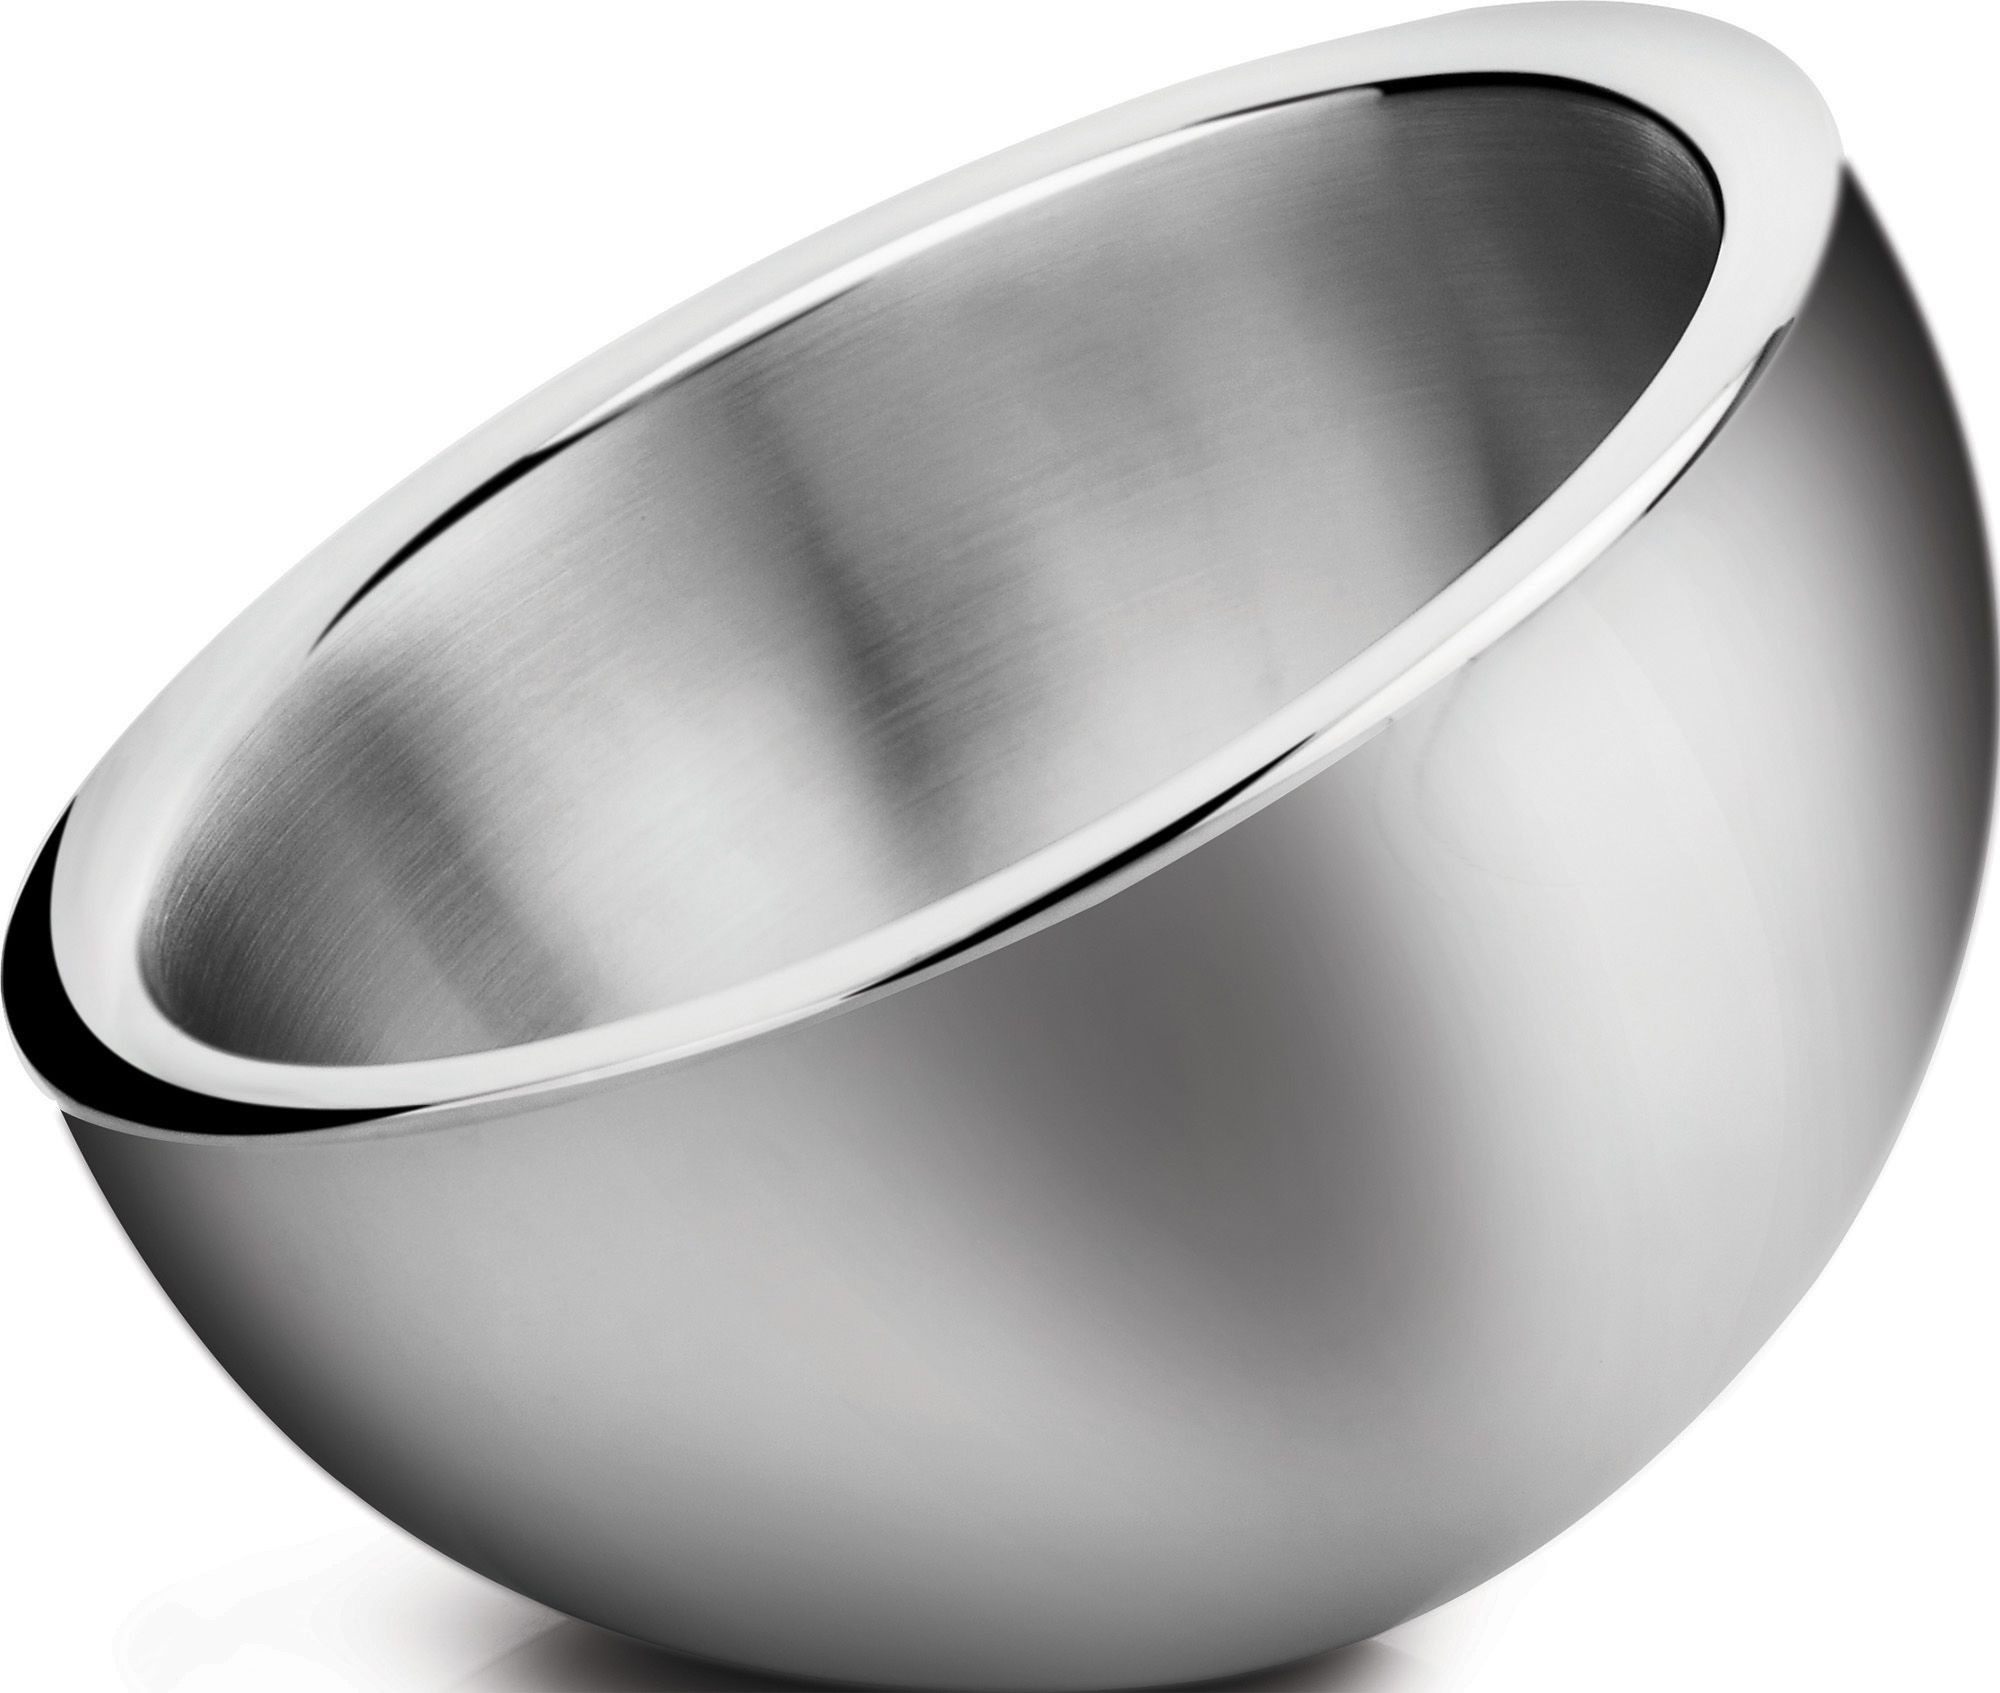 Winco DWAB-L Stainless Steel Large 2-1/4 Qt. Angled Display Bowl, Insulated